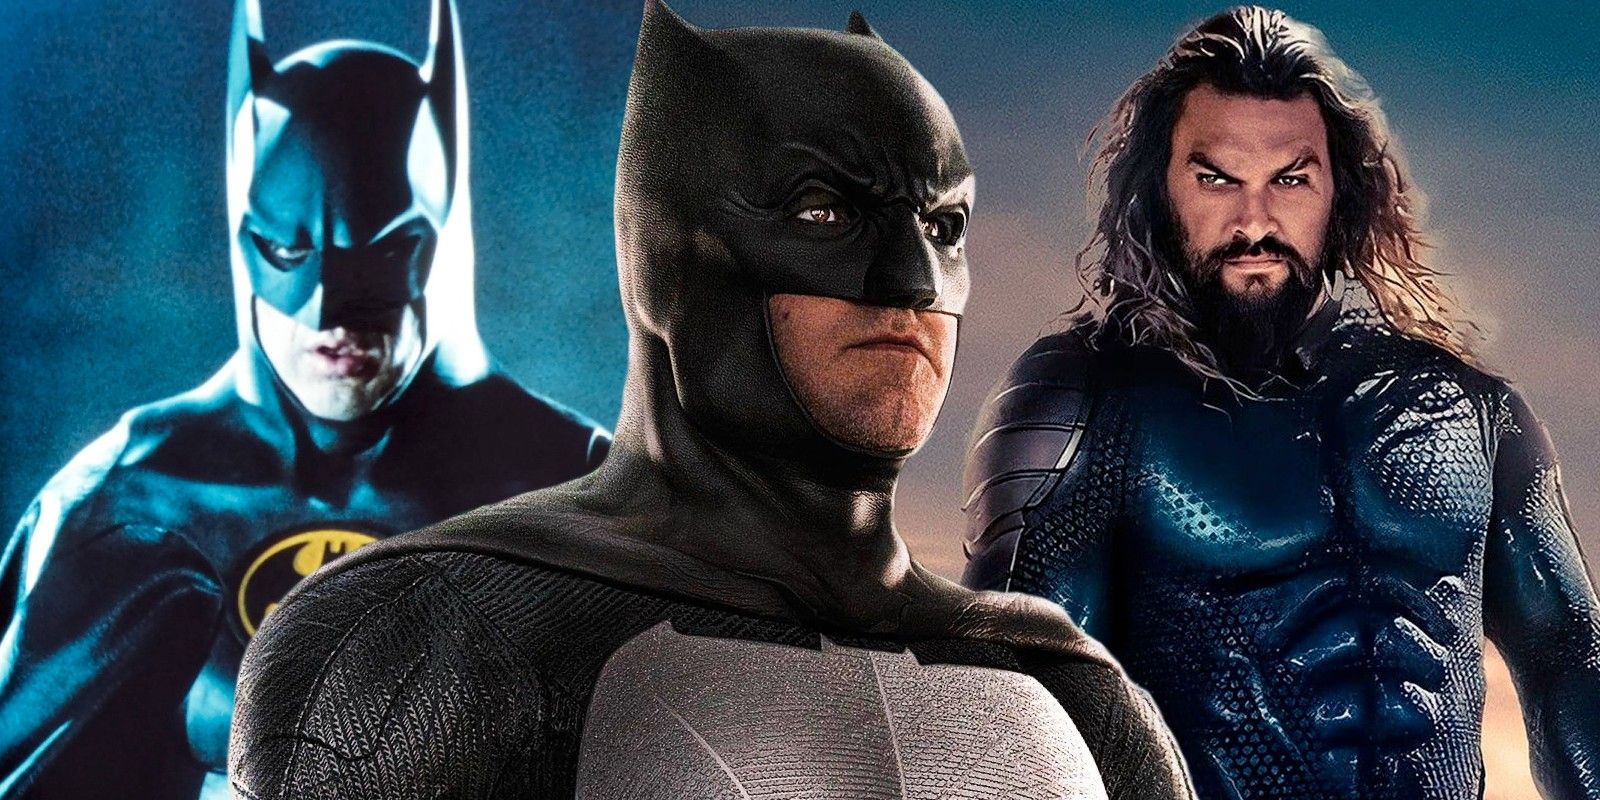 Will Ben Affleck Return to Play Batman in Another DC Movie After The Flash?